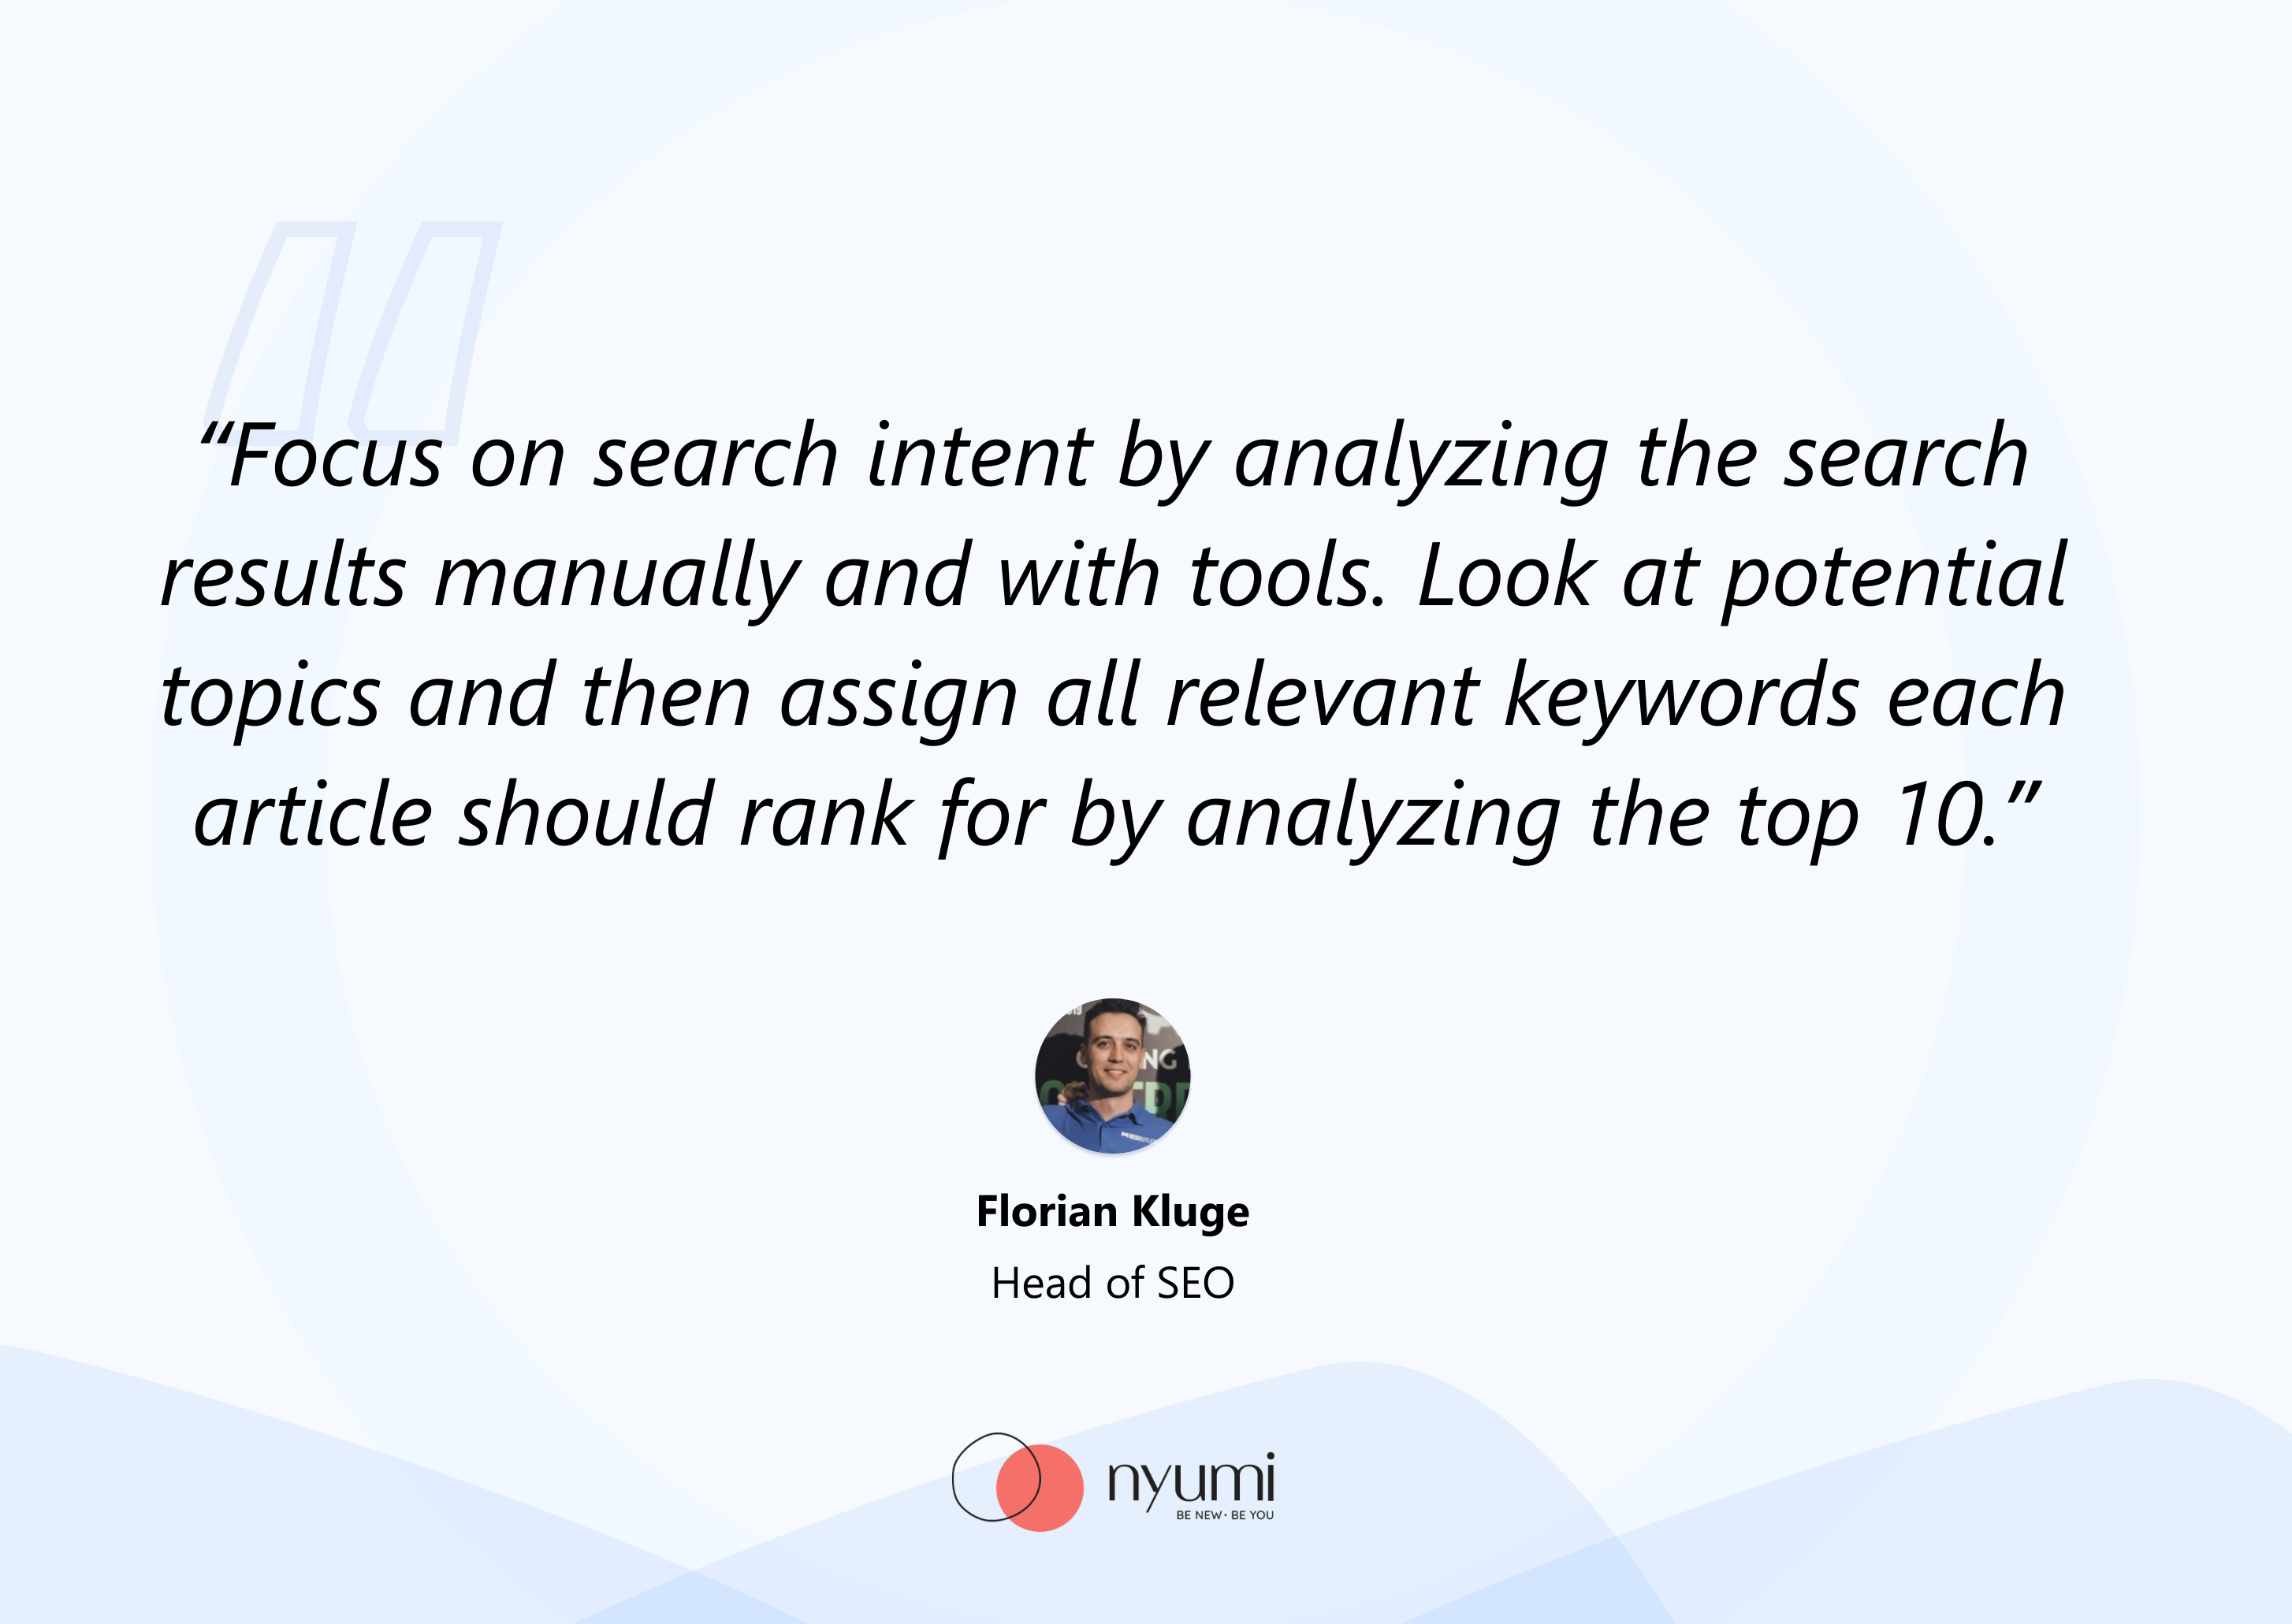 Florian Kluge's quote about search intent